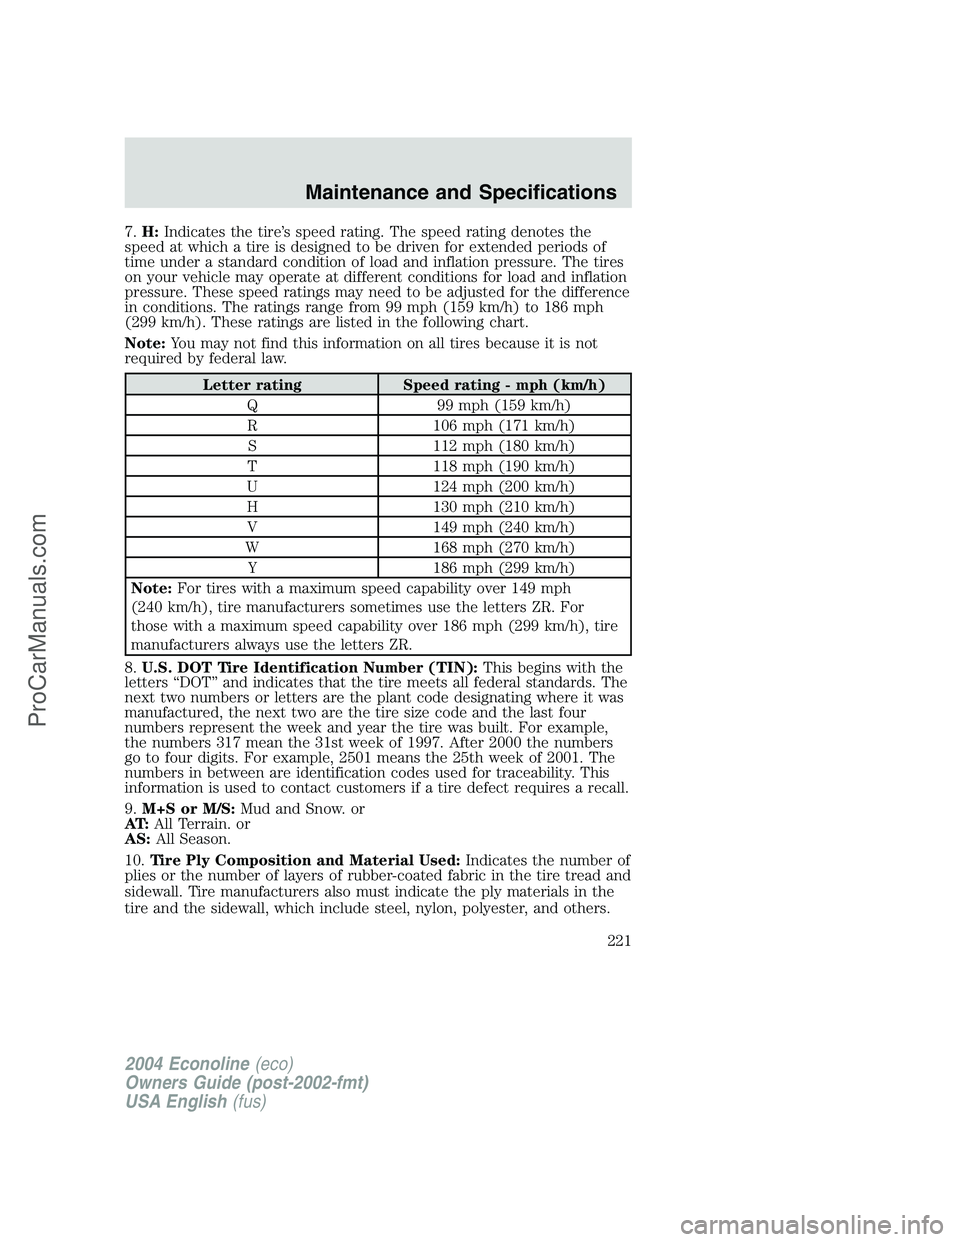 FORD E-150 2004  Owners Manual 7.H:Indicates the tire’s speed rating. The speed rating denotes the
speed at which a tire is designed to be driven for extended periods of
time under a standard condition of load and inflation press